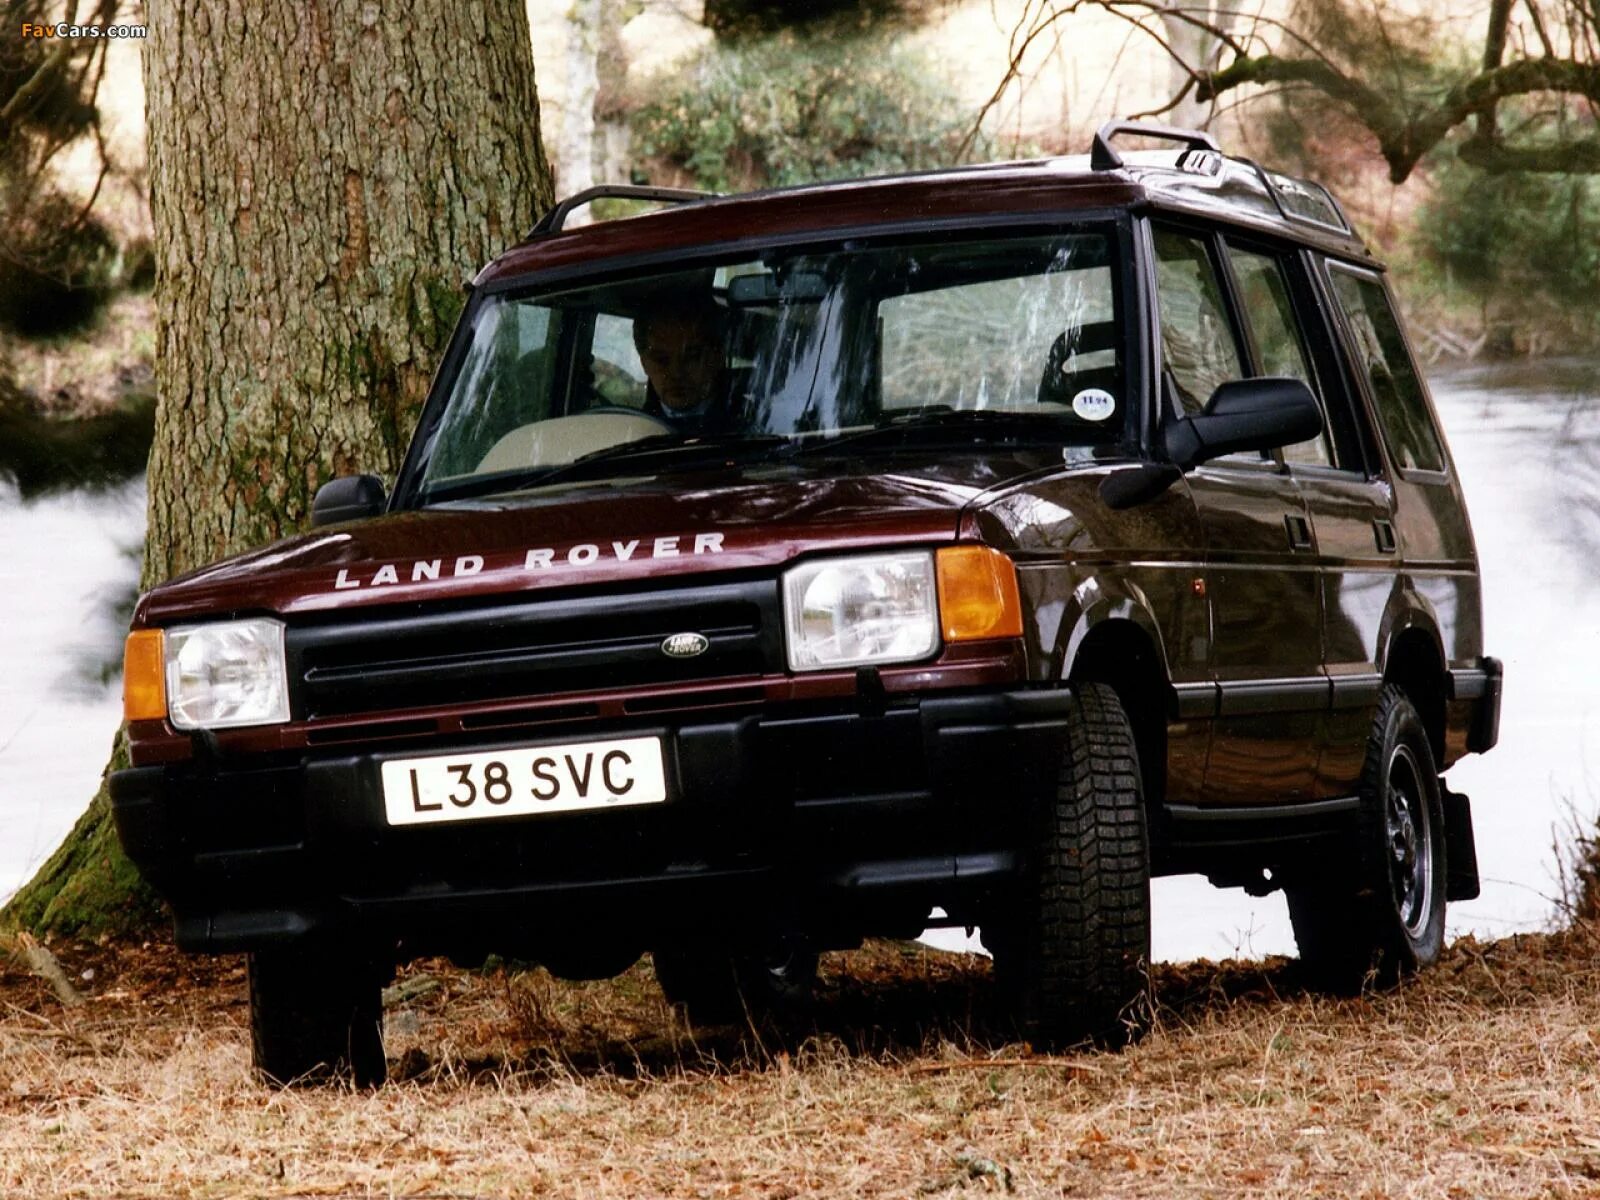 Land Rover Discovery 1. Ленд Ровер Дискавери 1994. Range Rover Discovery 1. Ленд Ровер Дискавери 1990.